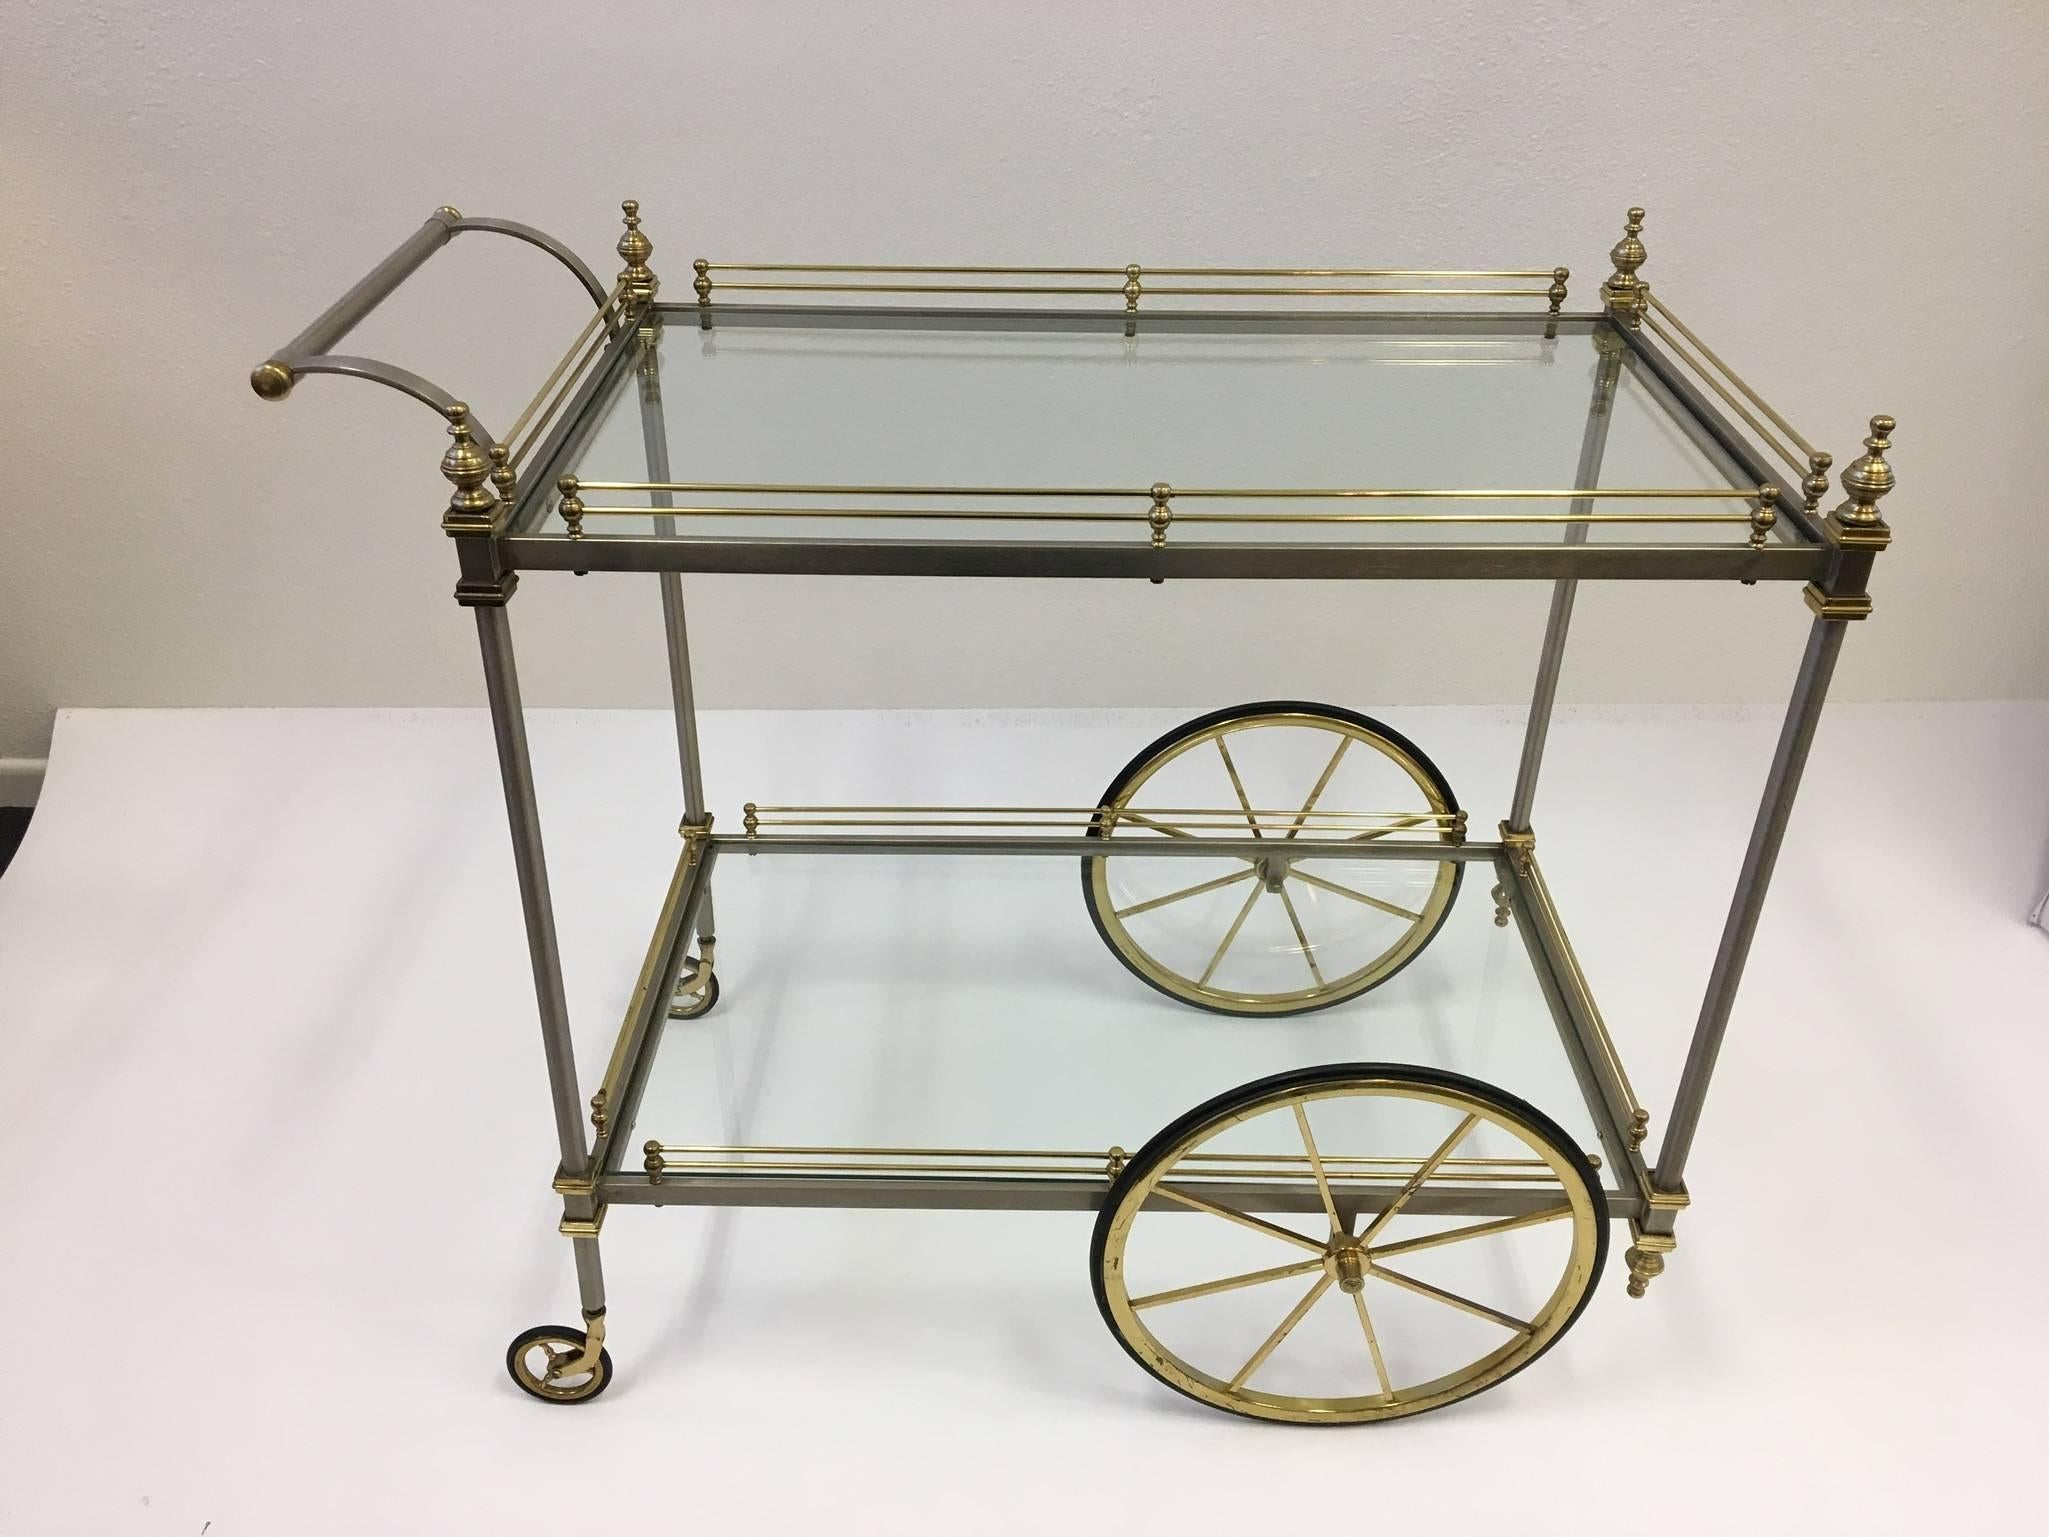 A glamorous 1960s Italian stainless steel and brass with glass inserts bar cart by Maison Jansen. New glass inserts. Still retains the metal made in Italy tag. 
Dimensions: 37.5 inches wide, 20.5 inches deep and 32.5 inches high.
 